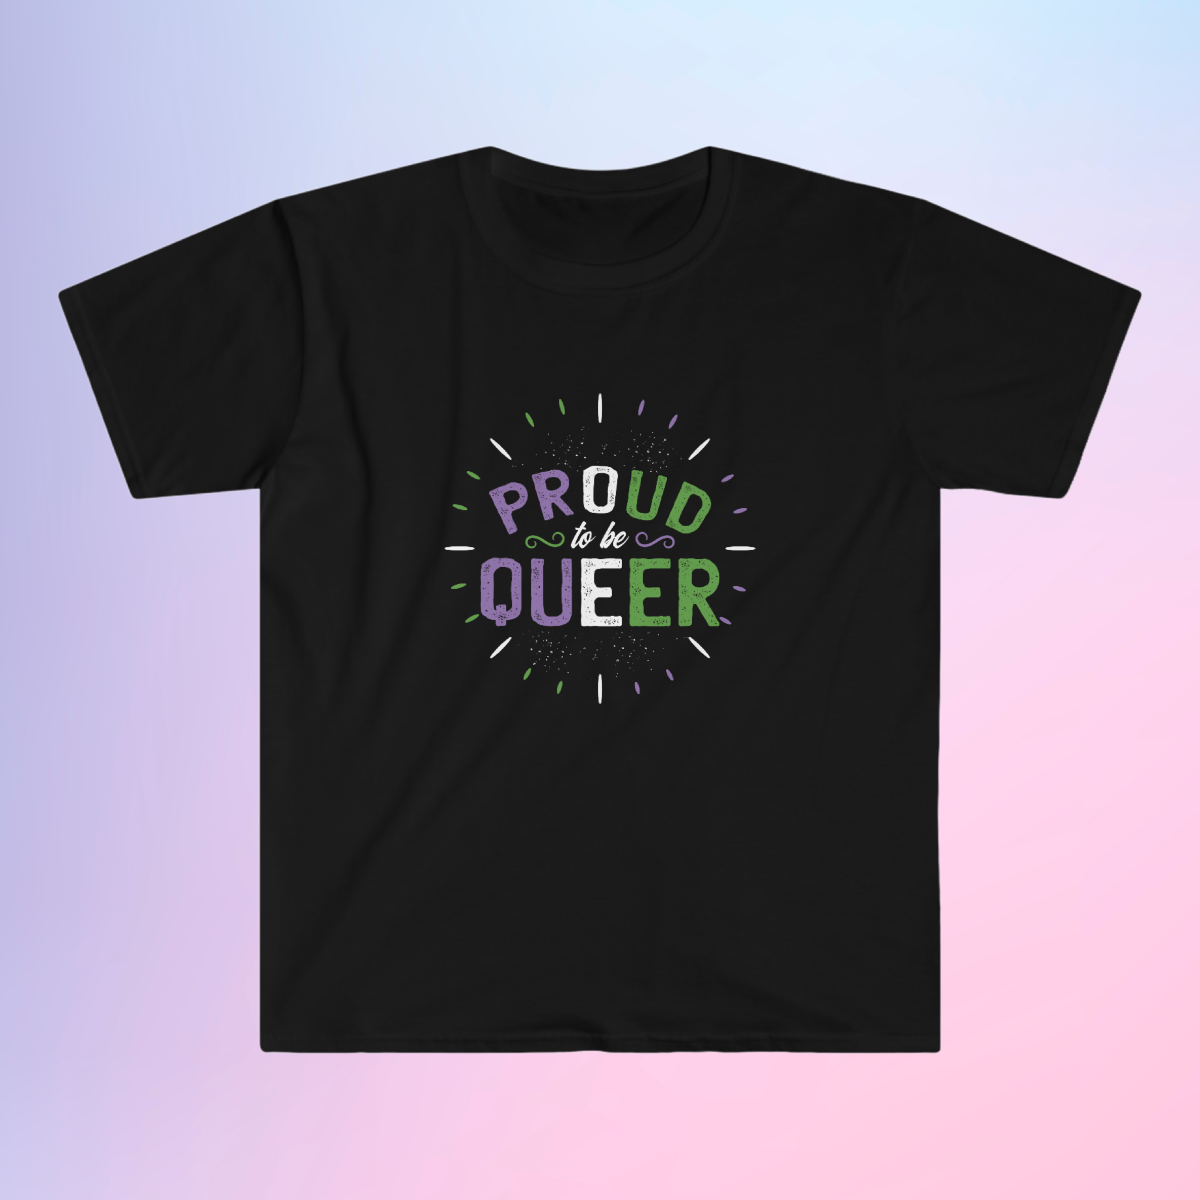 A Proud to Be Queer T-Shirt, expressing queer identity.